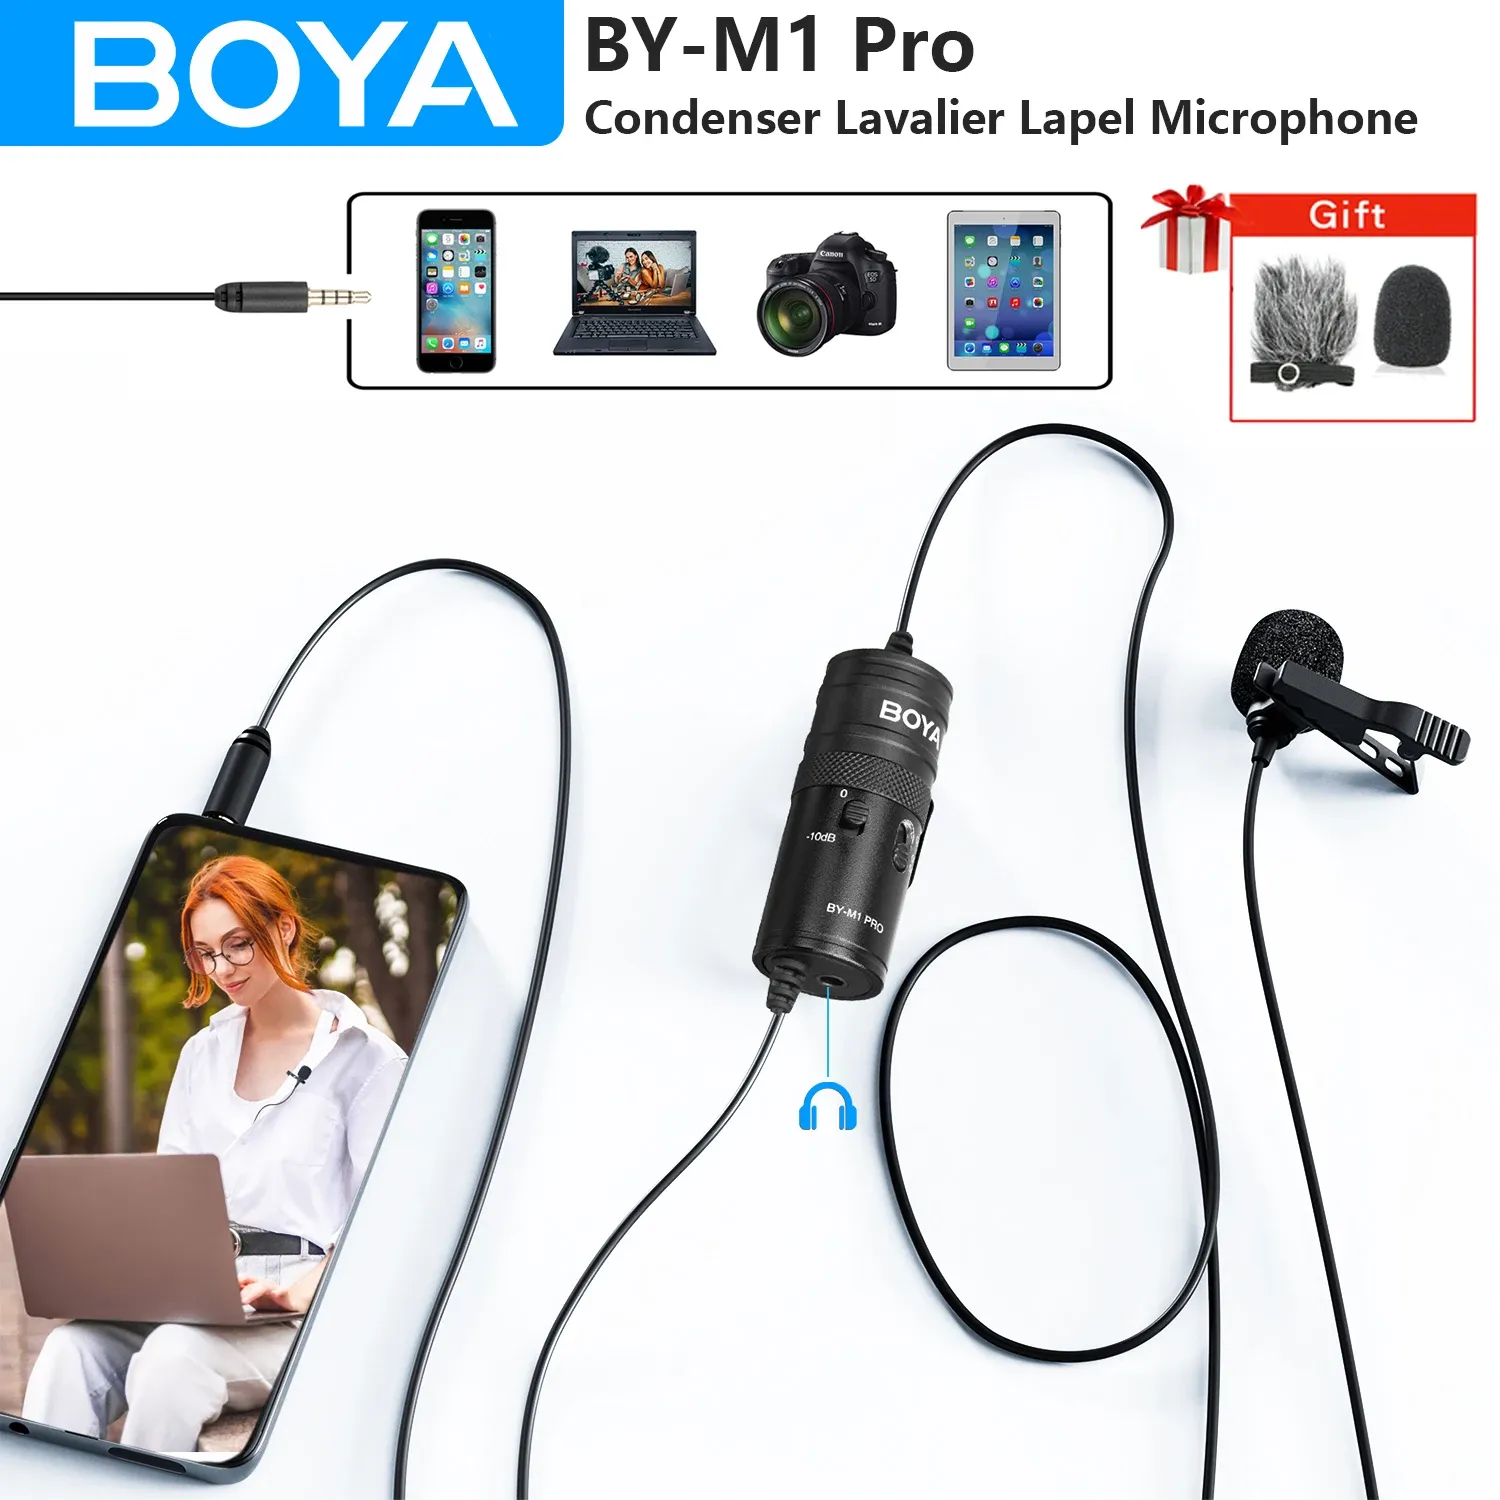 Tripods Boya Bym1 Pro Lavalier Lapel Microphone for Iphone Android Dslr Cameras Pc Laptop Computer Vlog Streaming Youtube Recording Mic